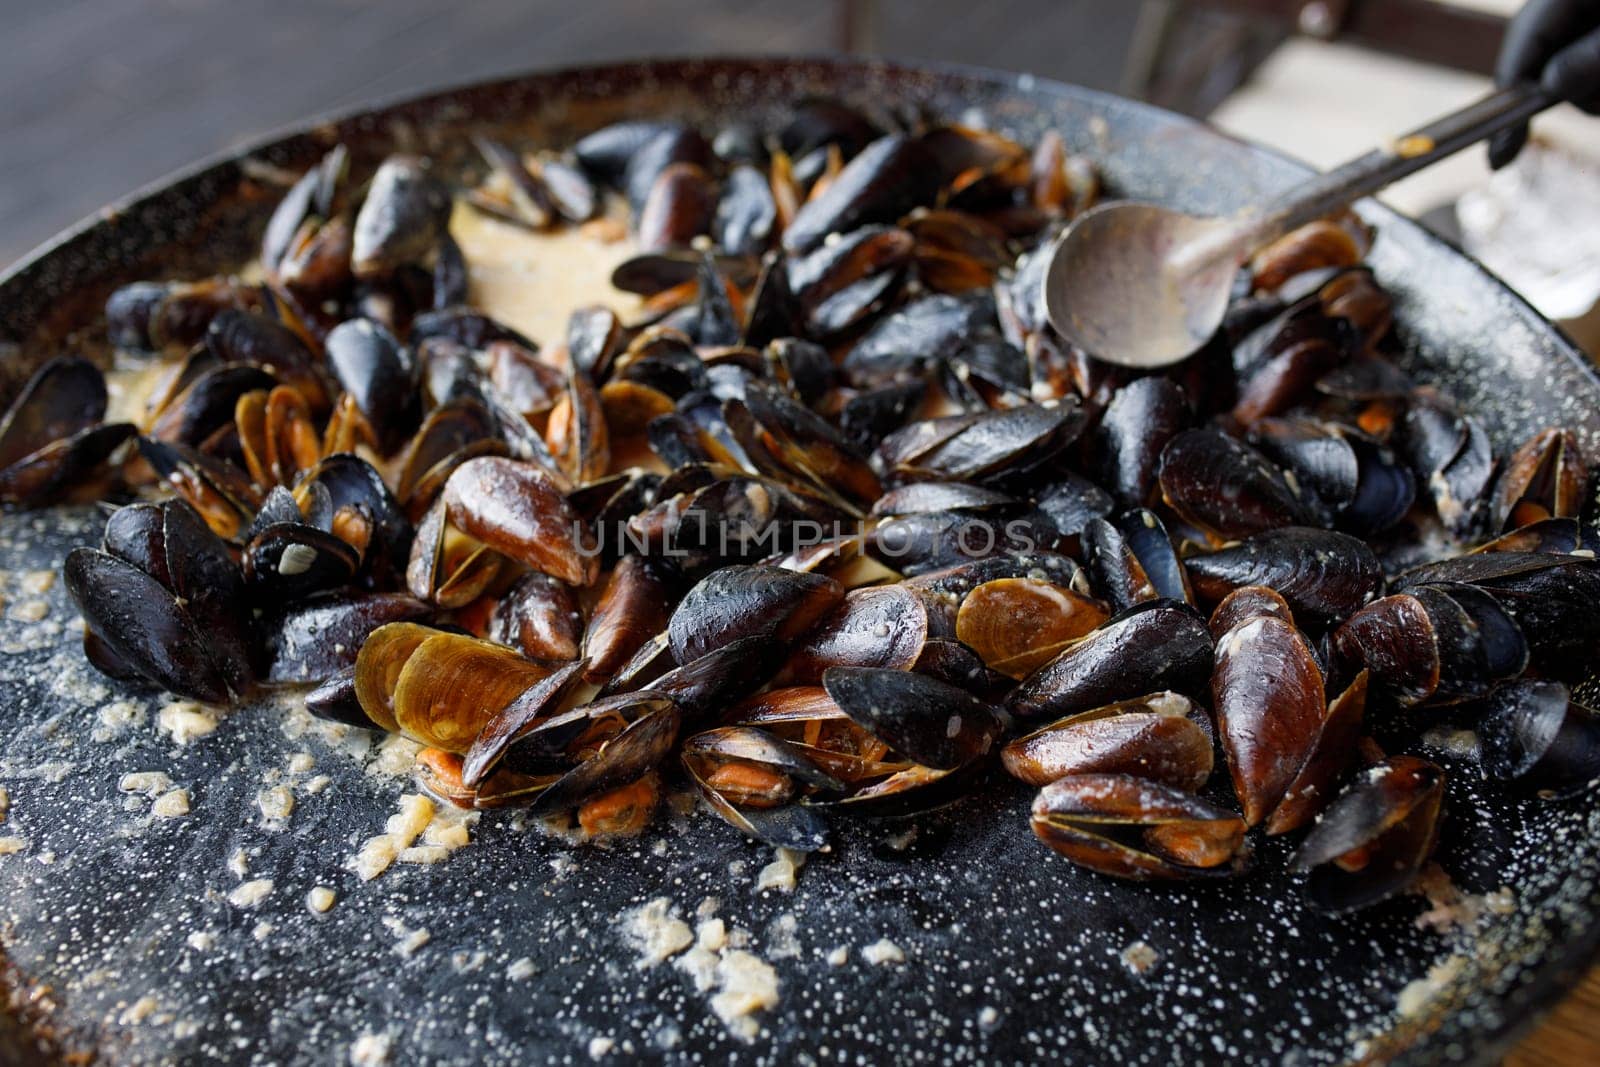 mussels are cooked on the street. High quality photo